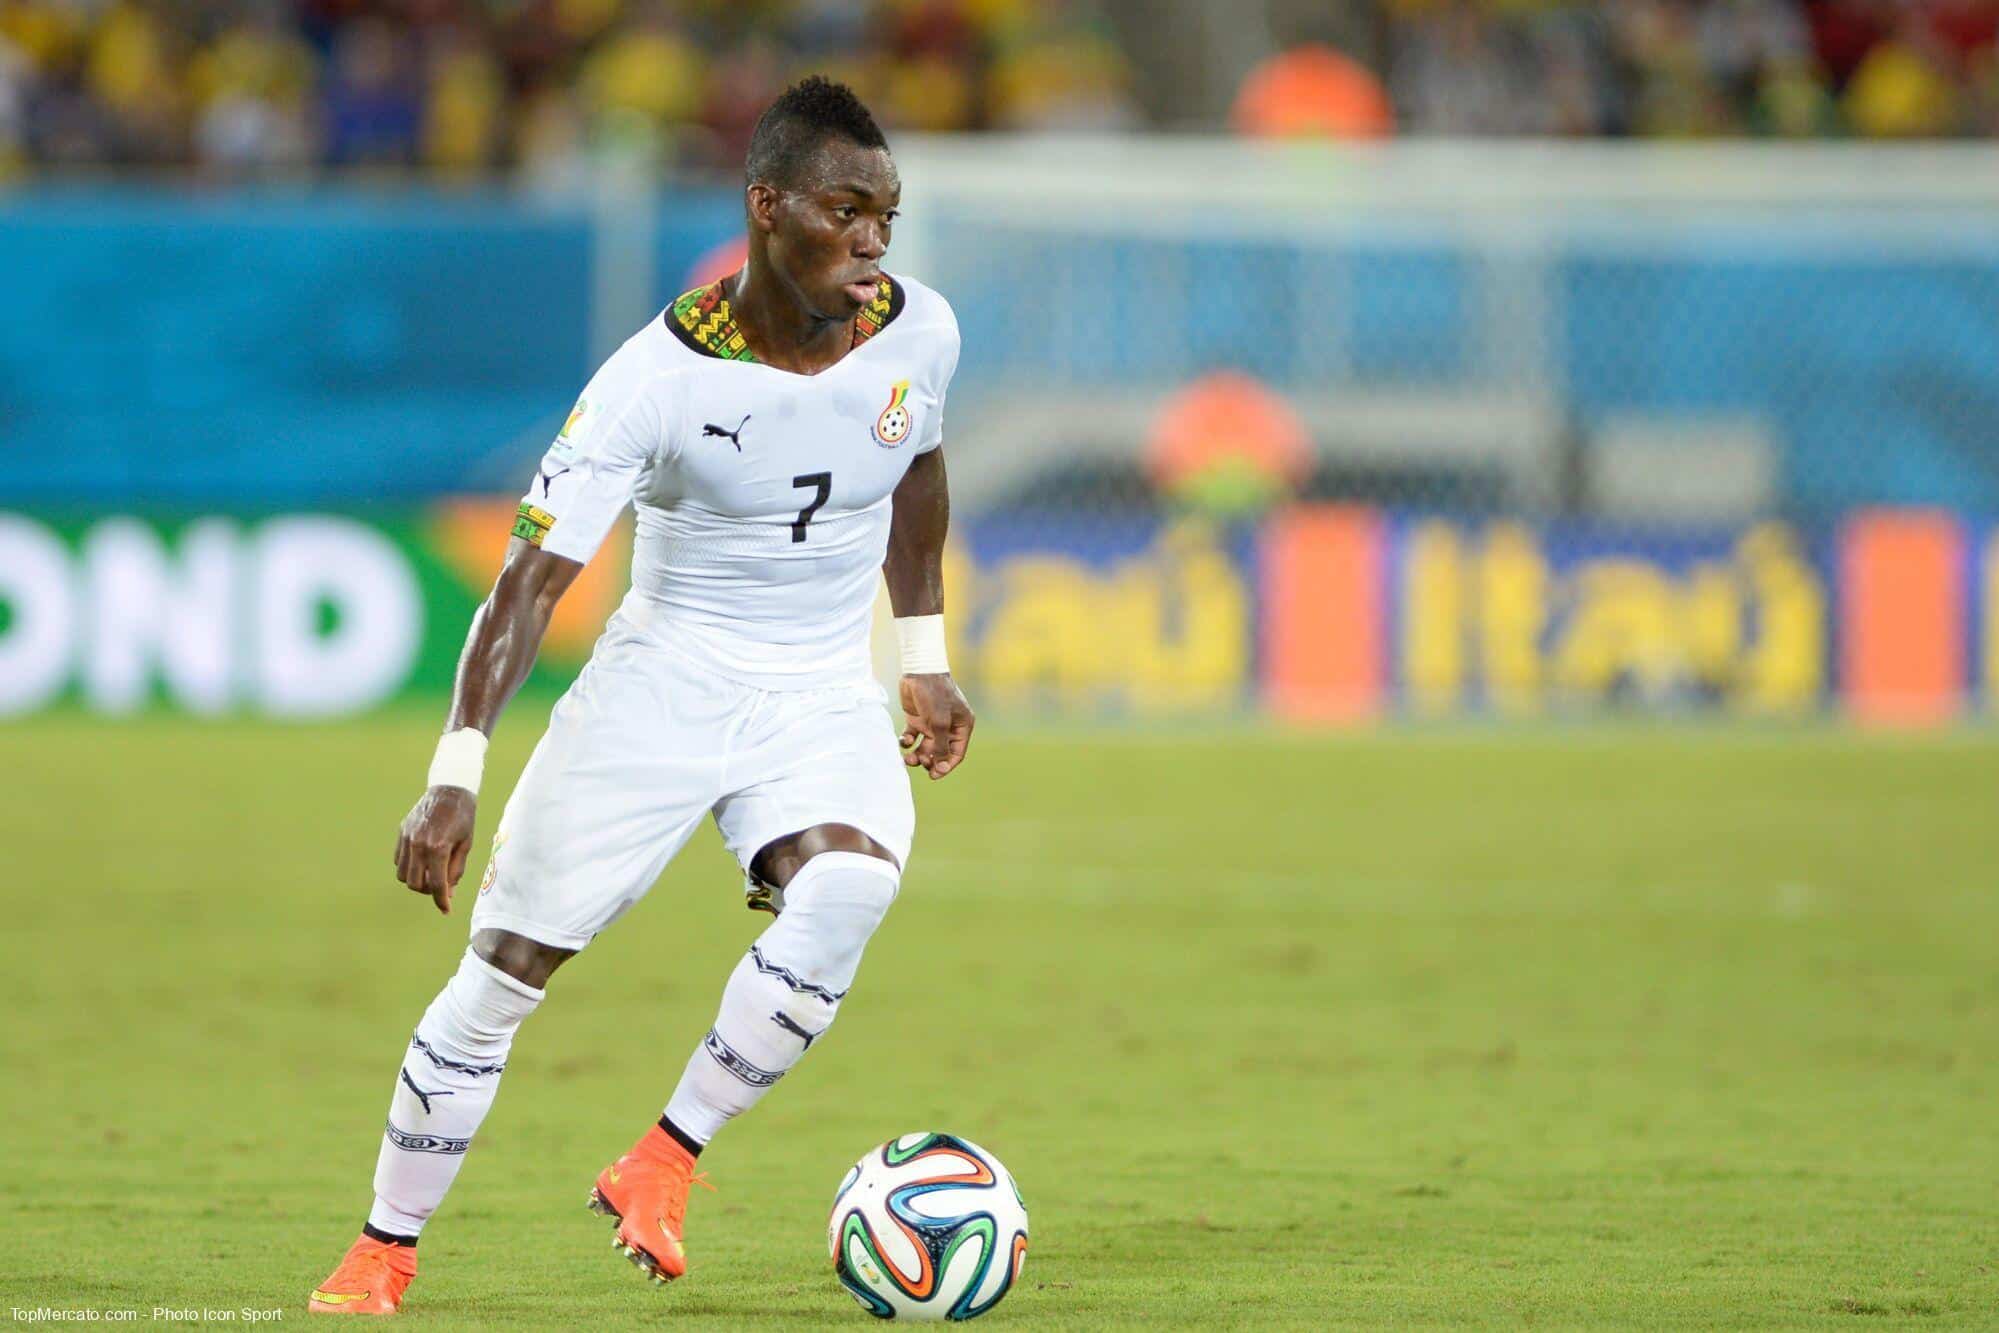 Mohammed Kudus praises the late Christian Atsu for his dribbling skills and his charity work